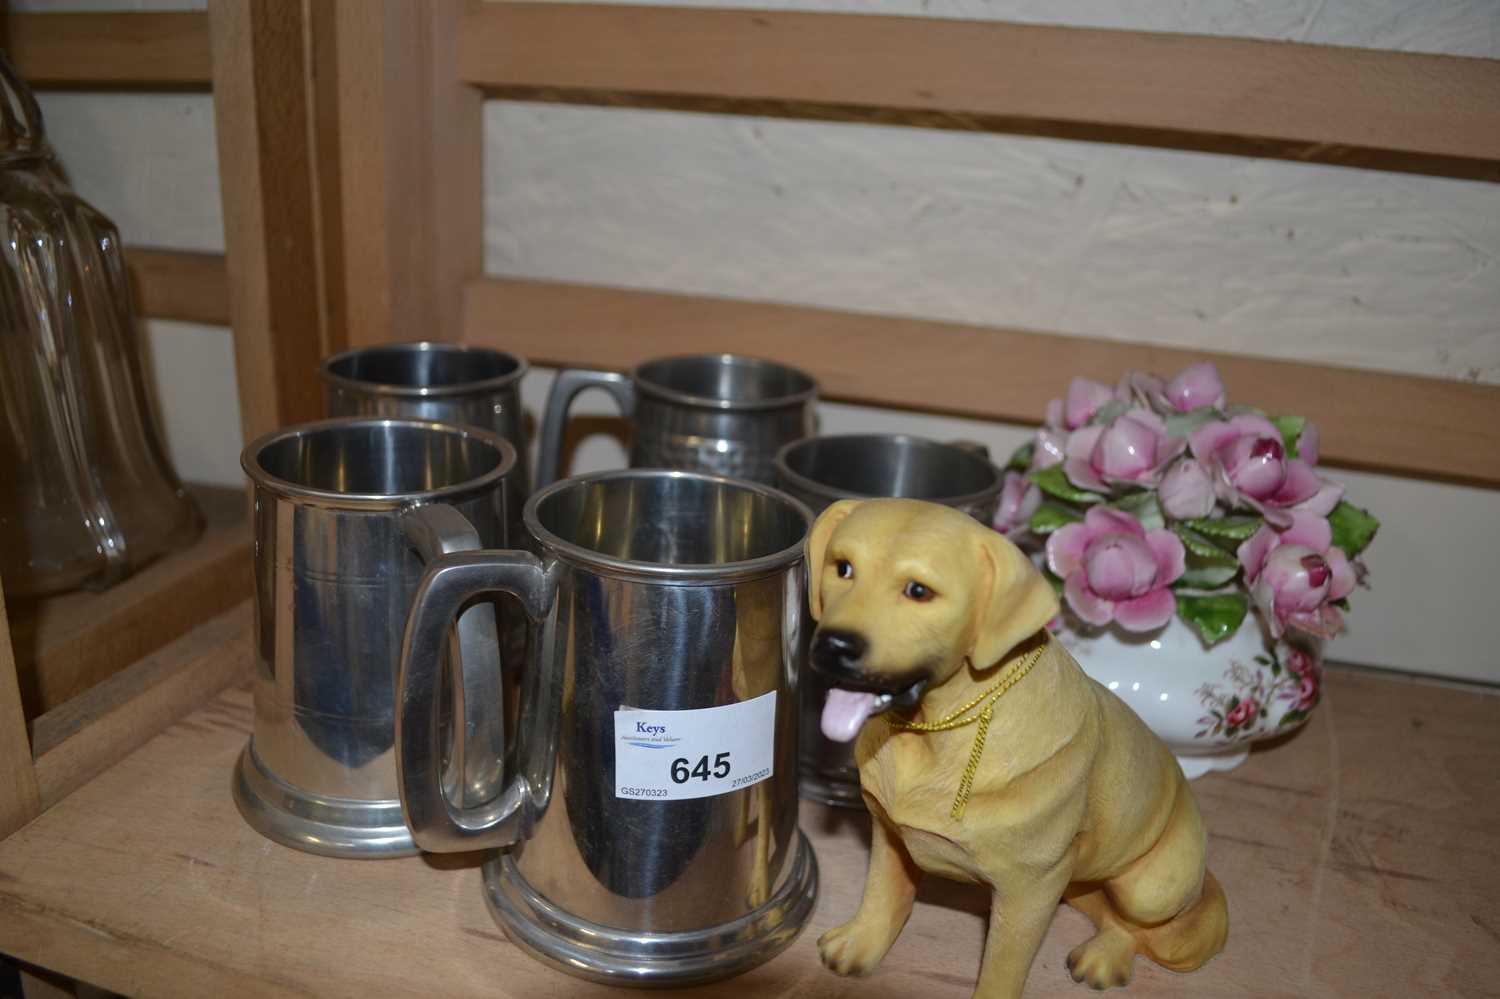 Five pewter tankards together with a model labrador and a ceramic vase of flowers